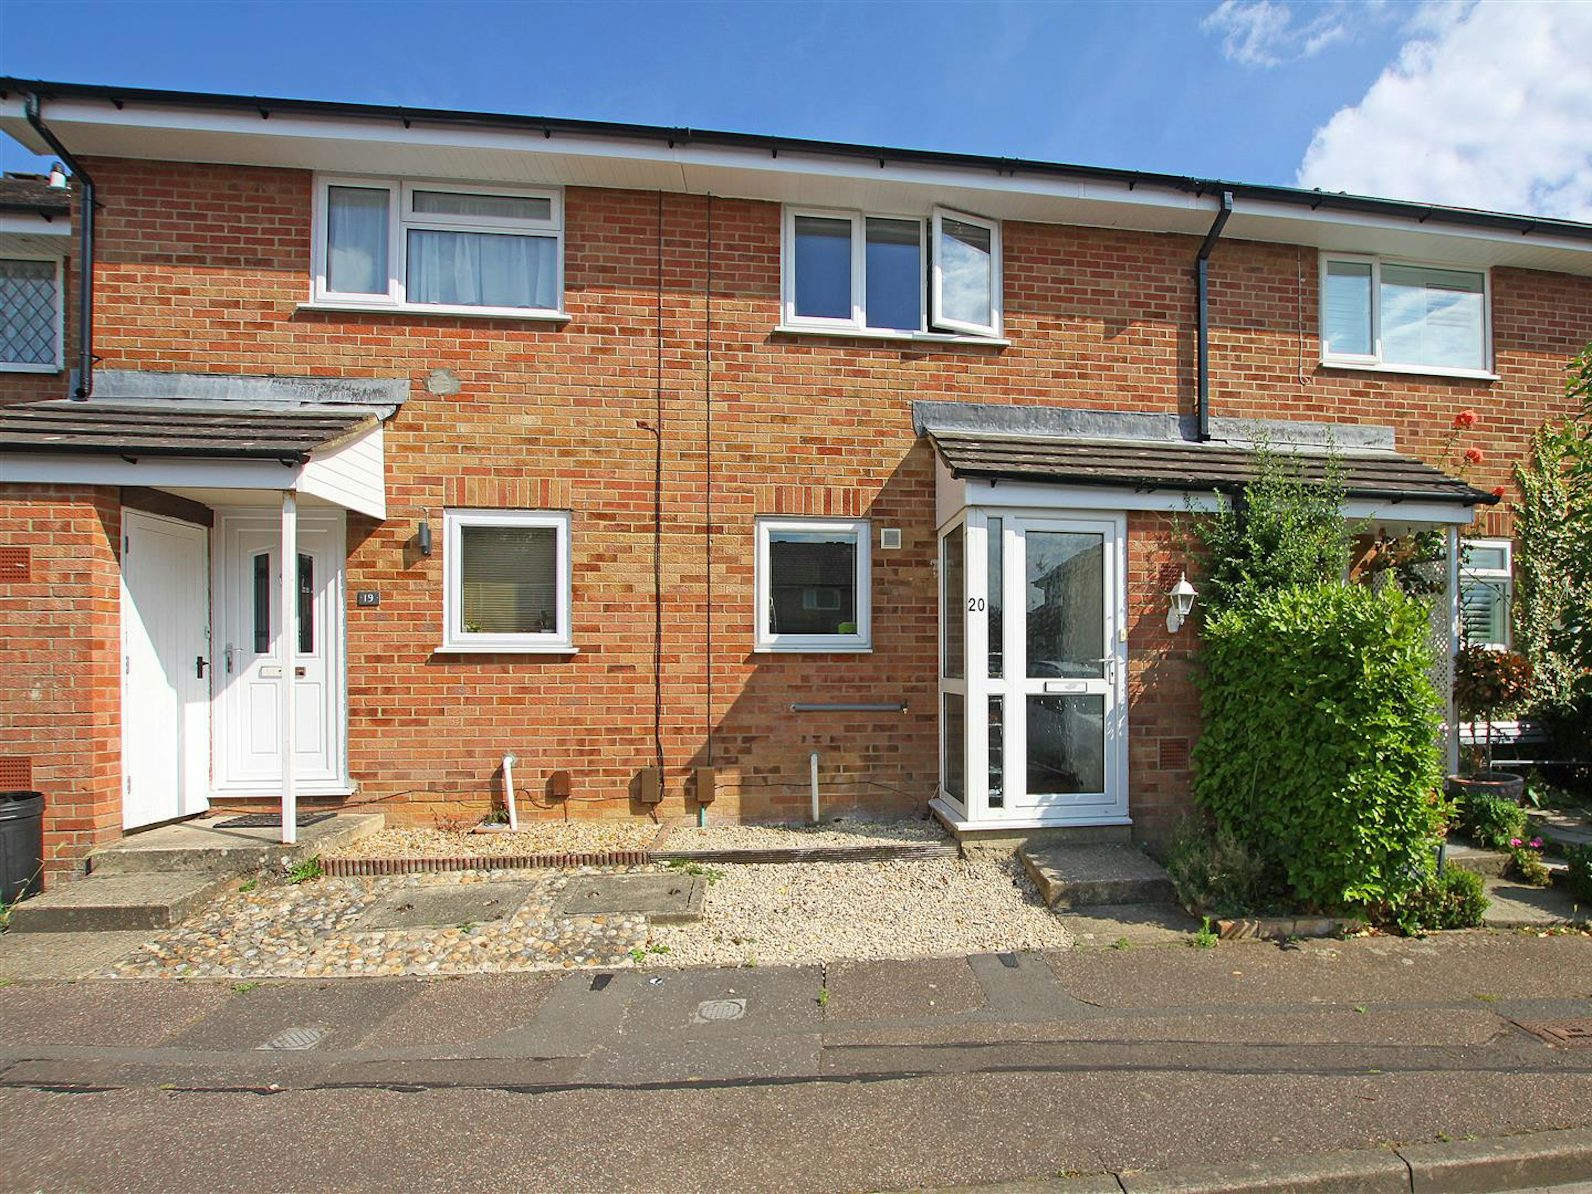 Terraced House for sale on Broadlands Close Bournemouth, BH8